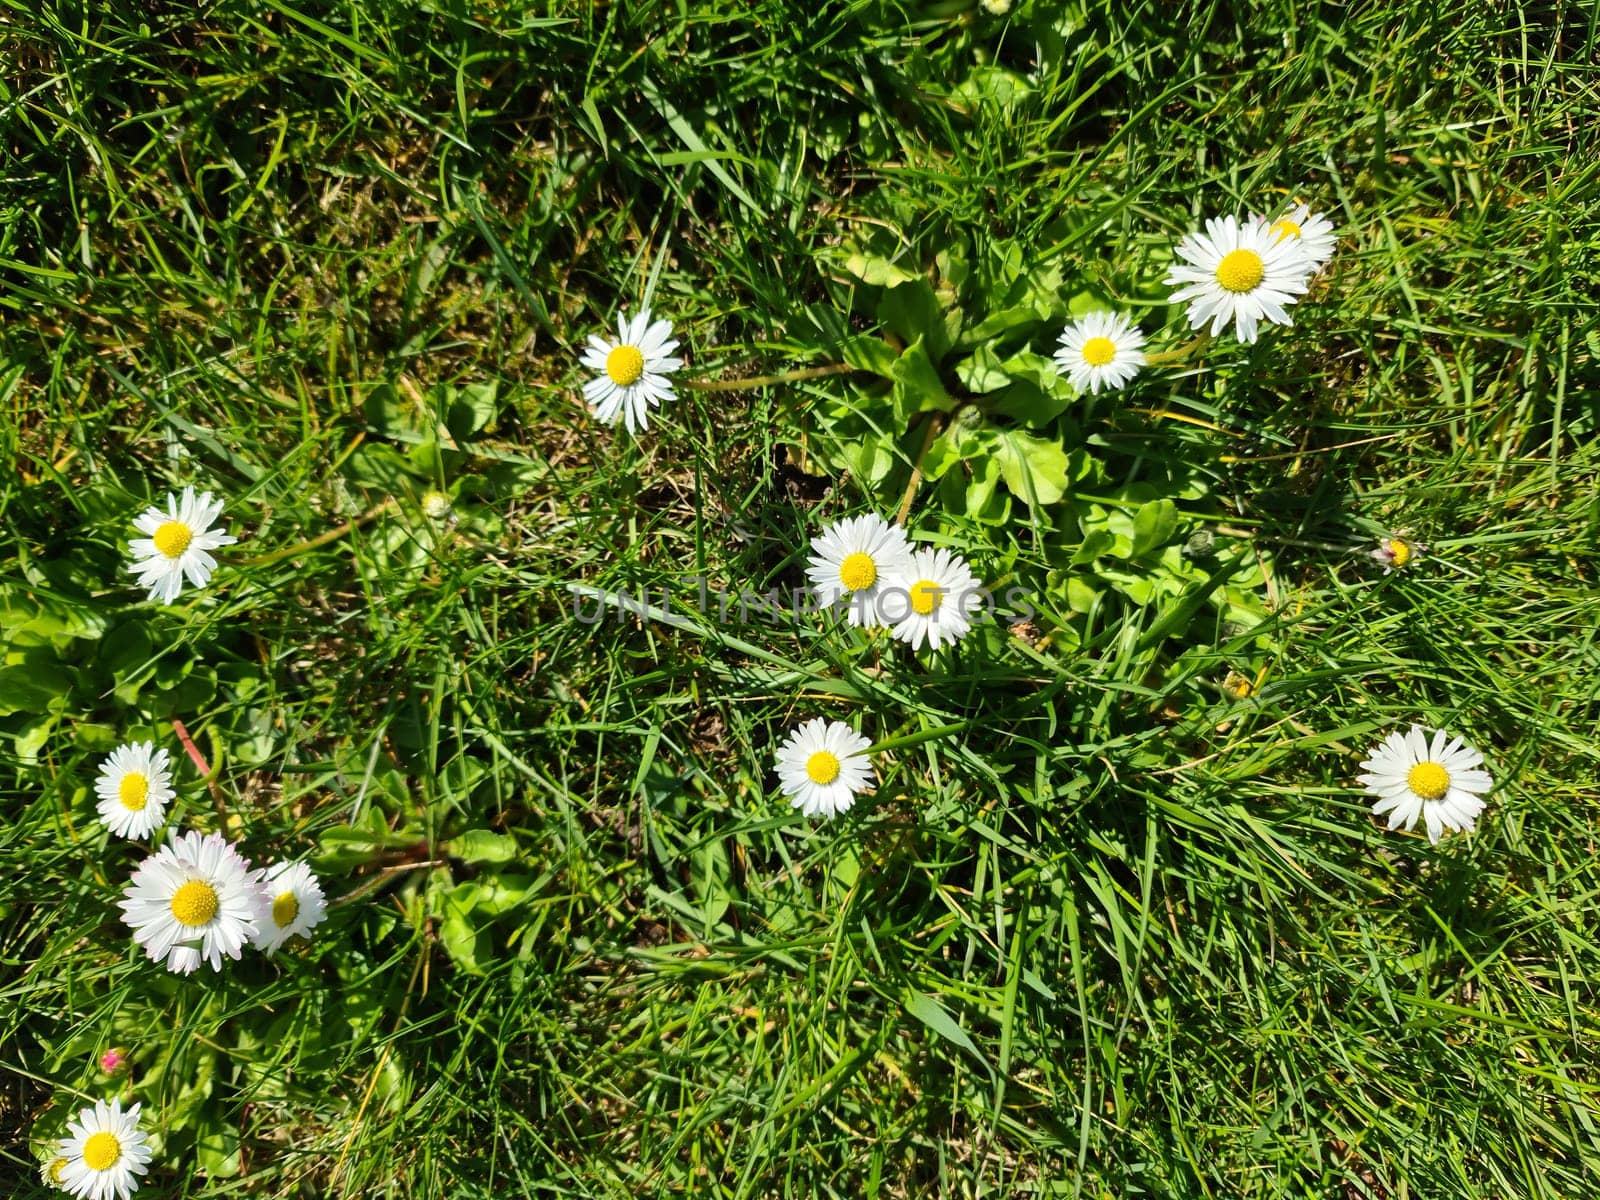 Daisy flowers in green grass. by MP_foto71